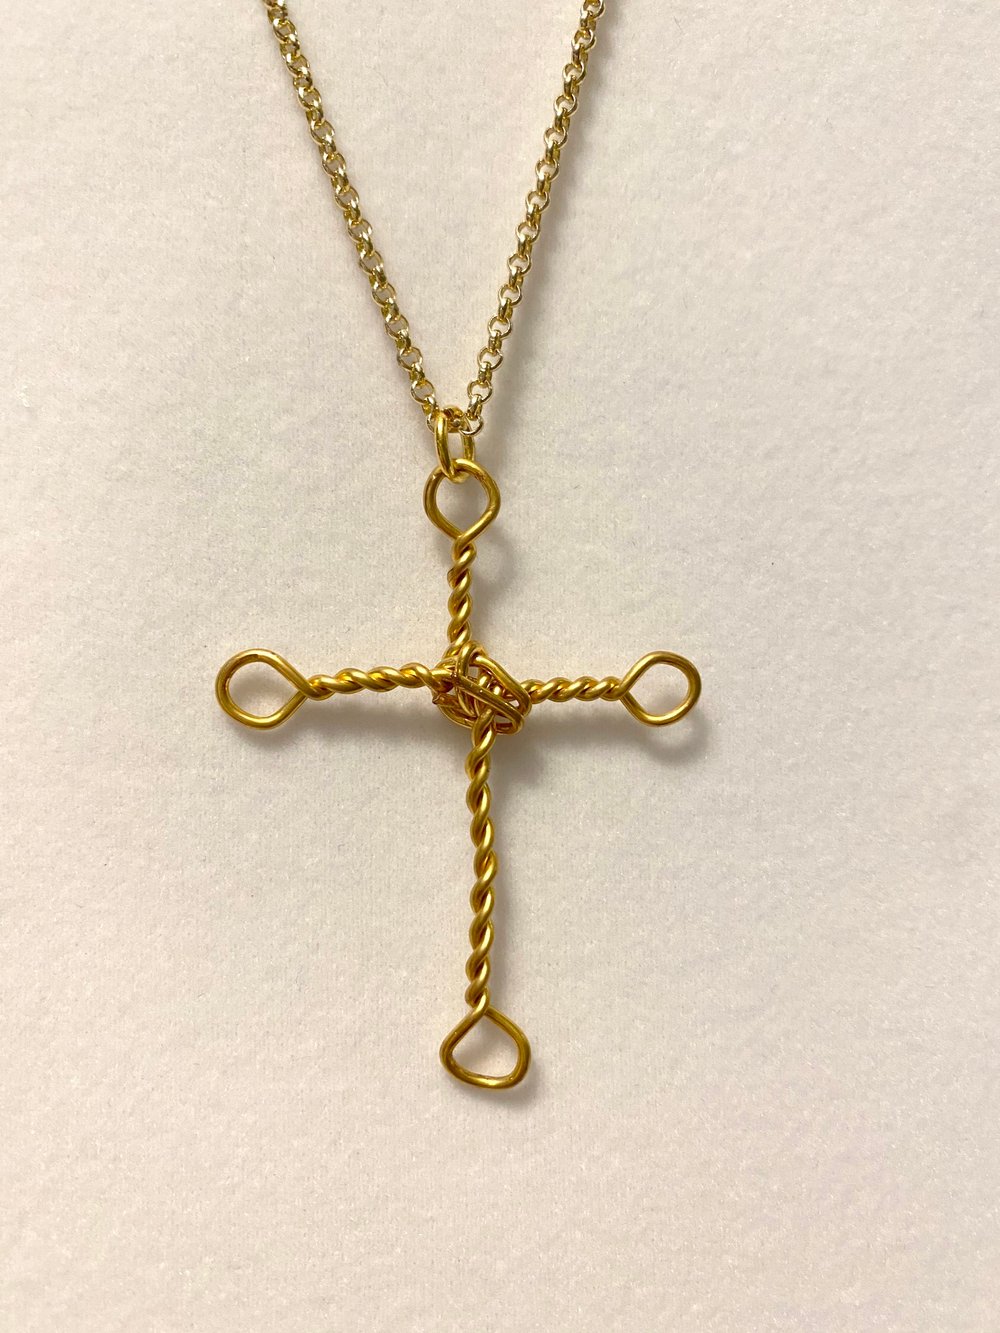 Gold Cross and Chain Necklace